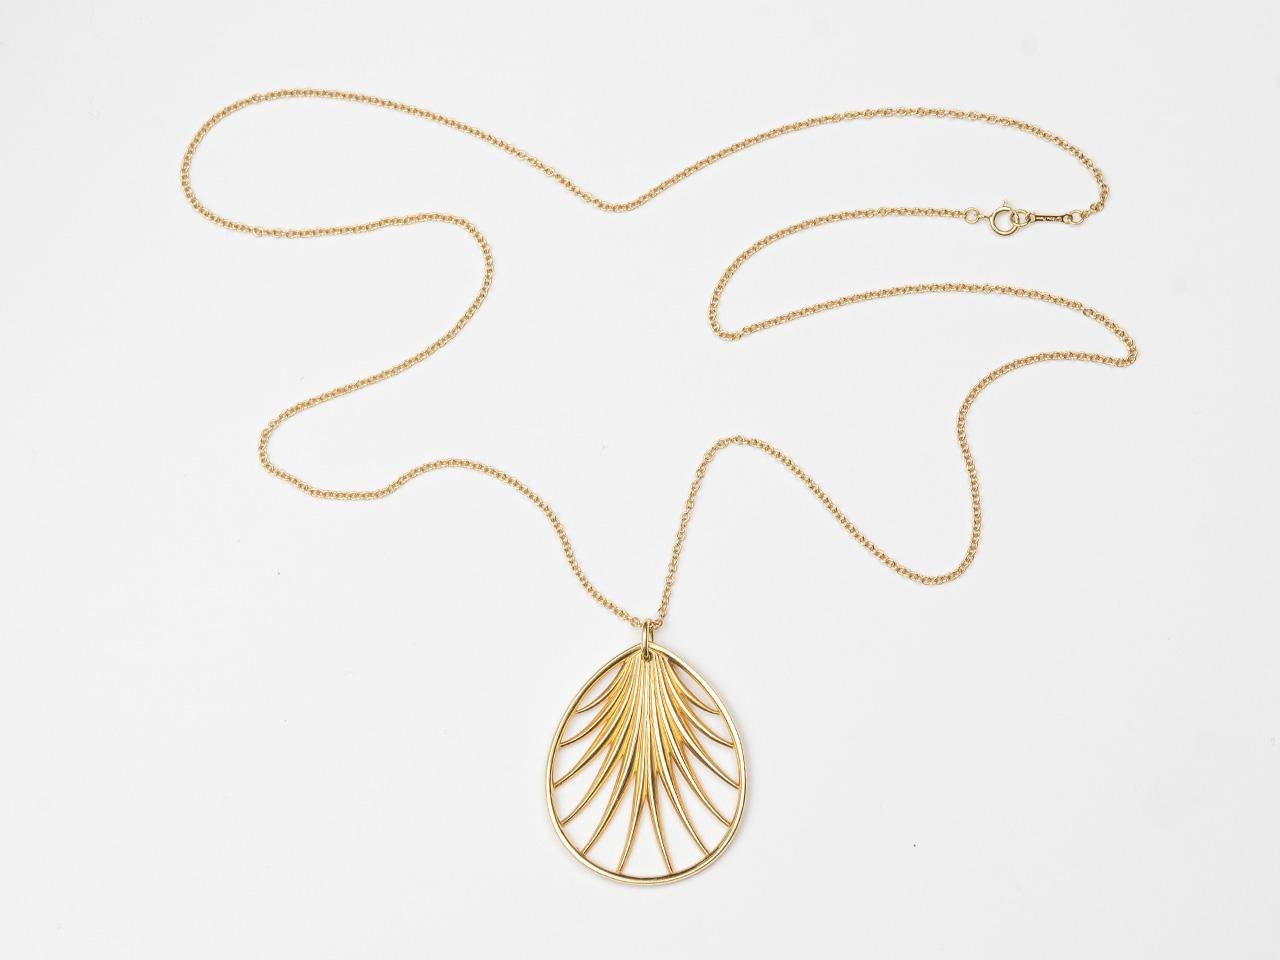 18k gold  16 inch chain suspending a stylized palm frond. Signed PALOMA  PICASSO TIFFANY & CO. 750 AU ITALY.